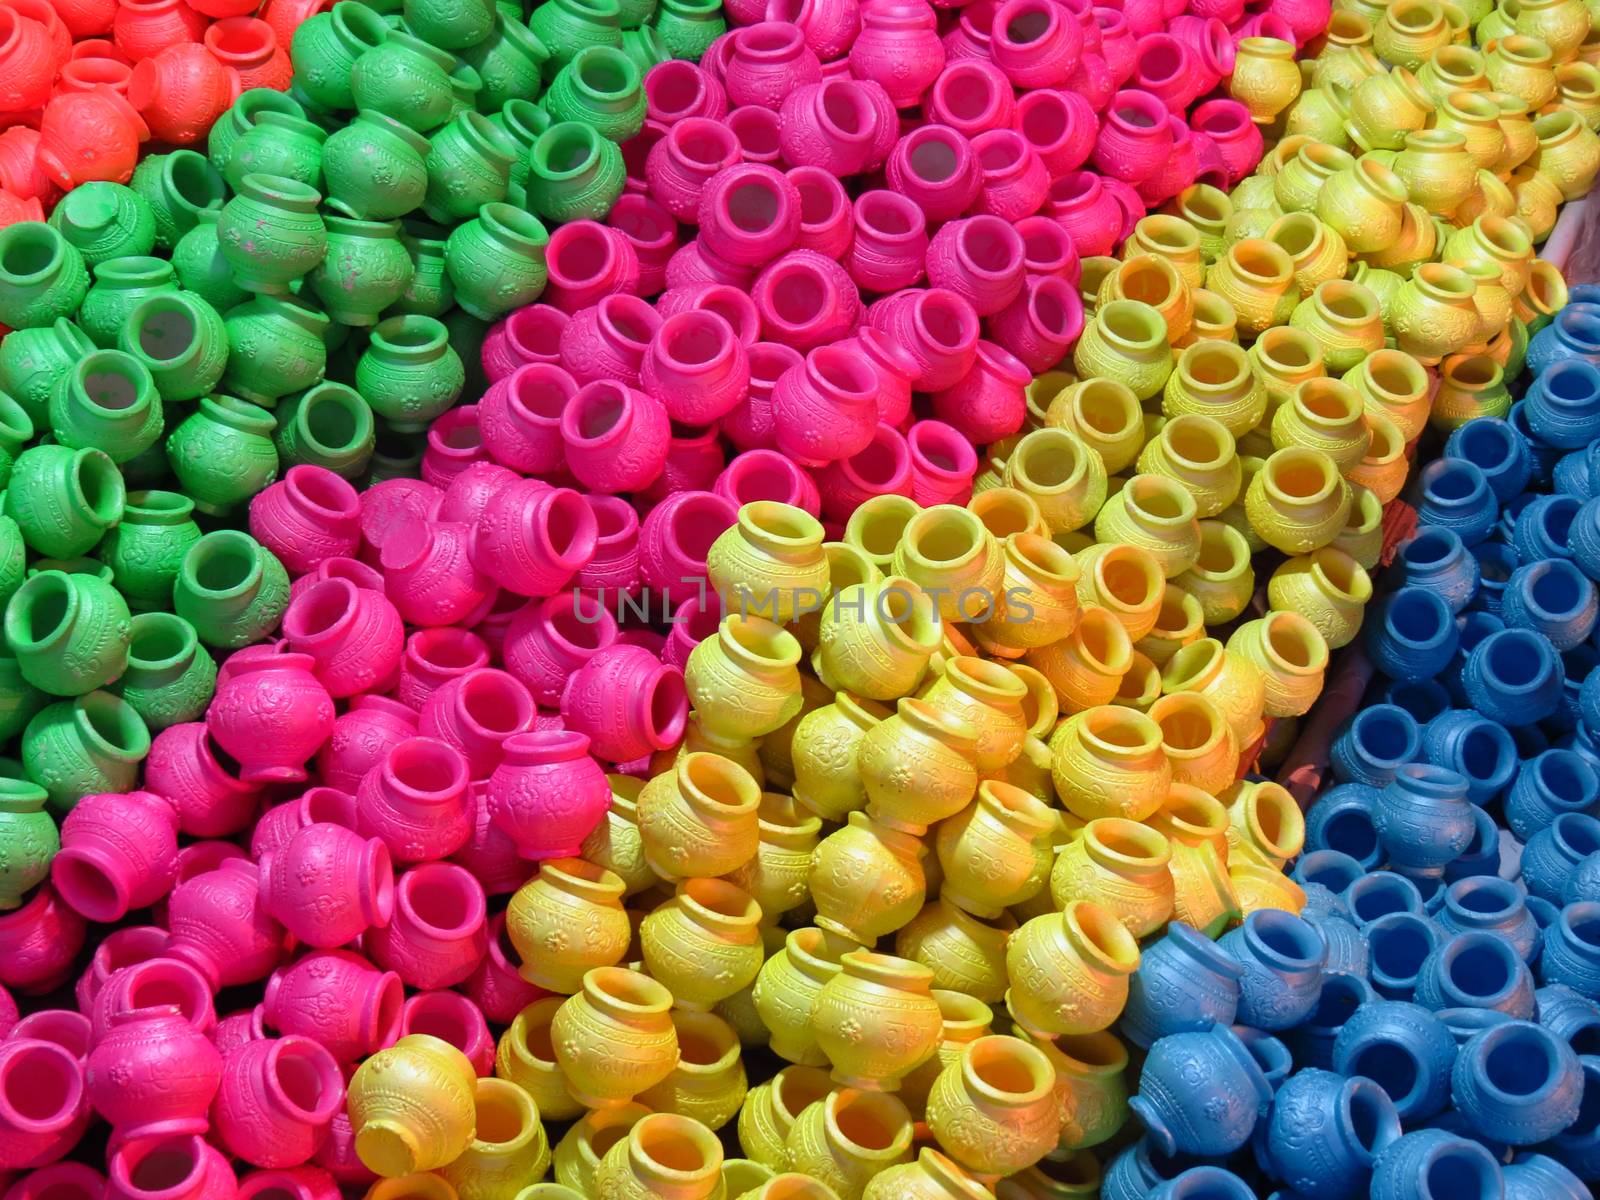 A background of colorful pots used for rituals during Diwali festival in India.                               